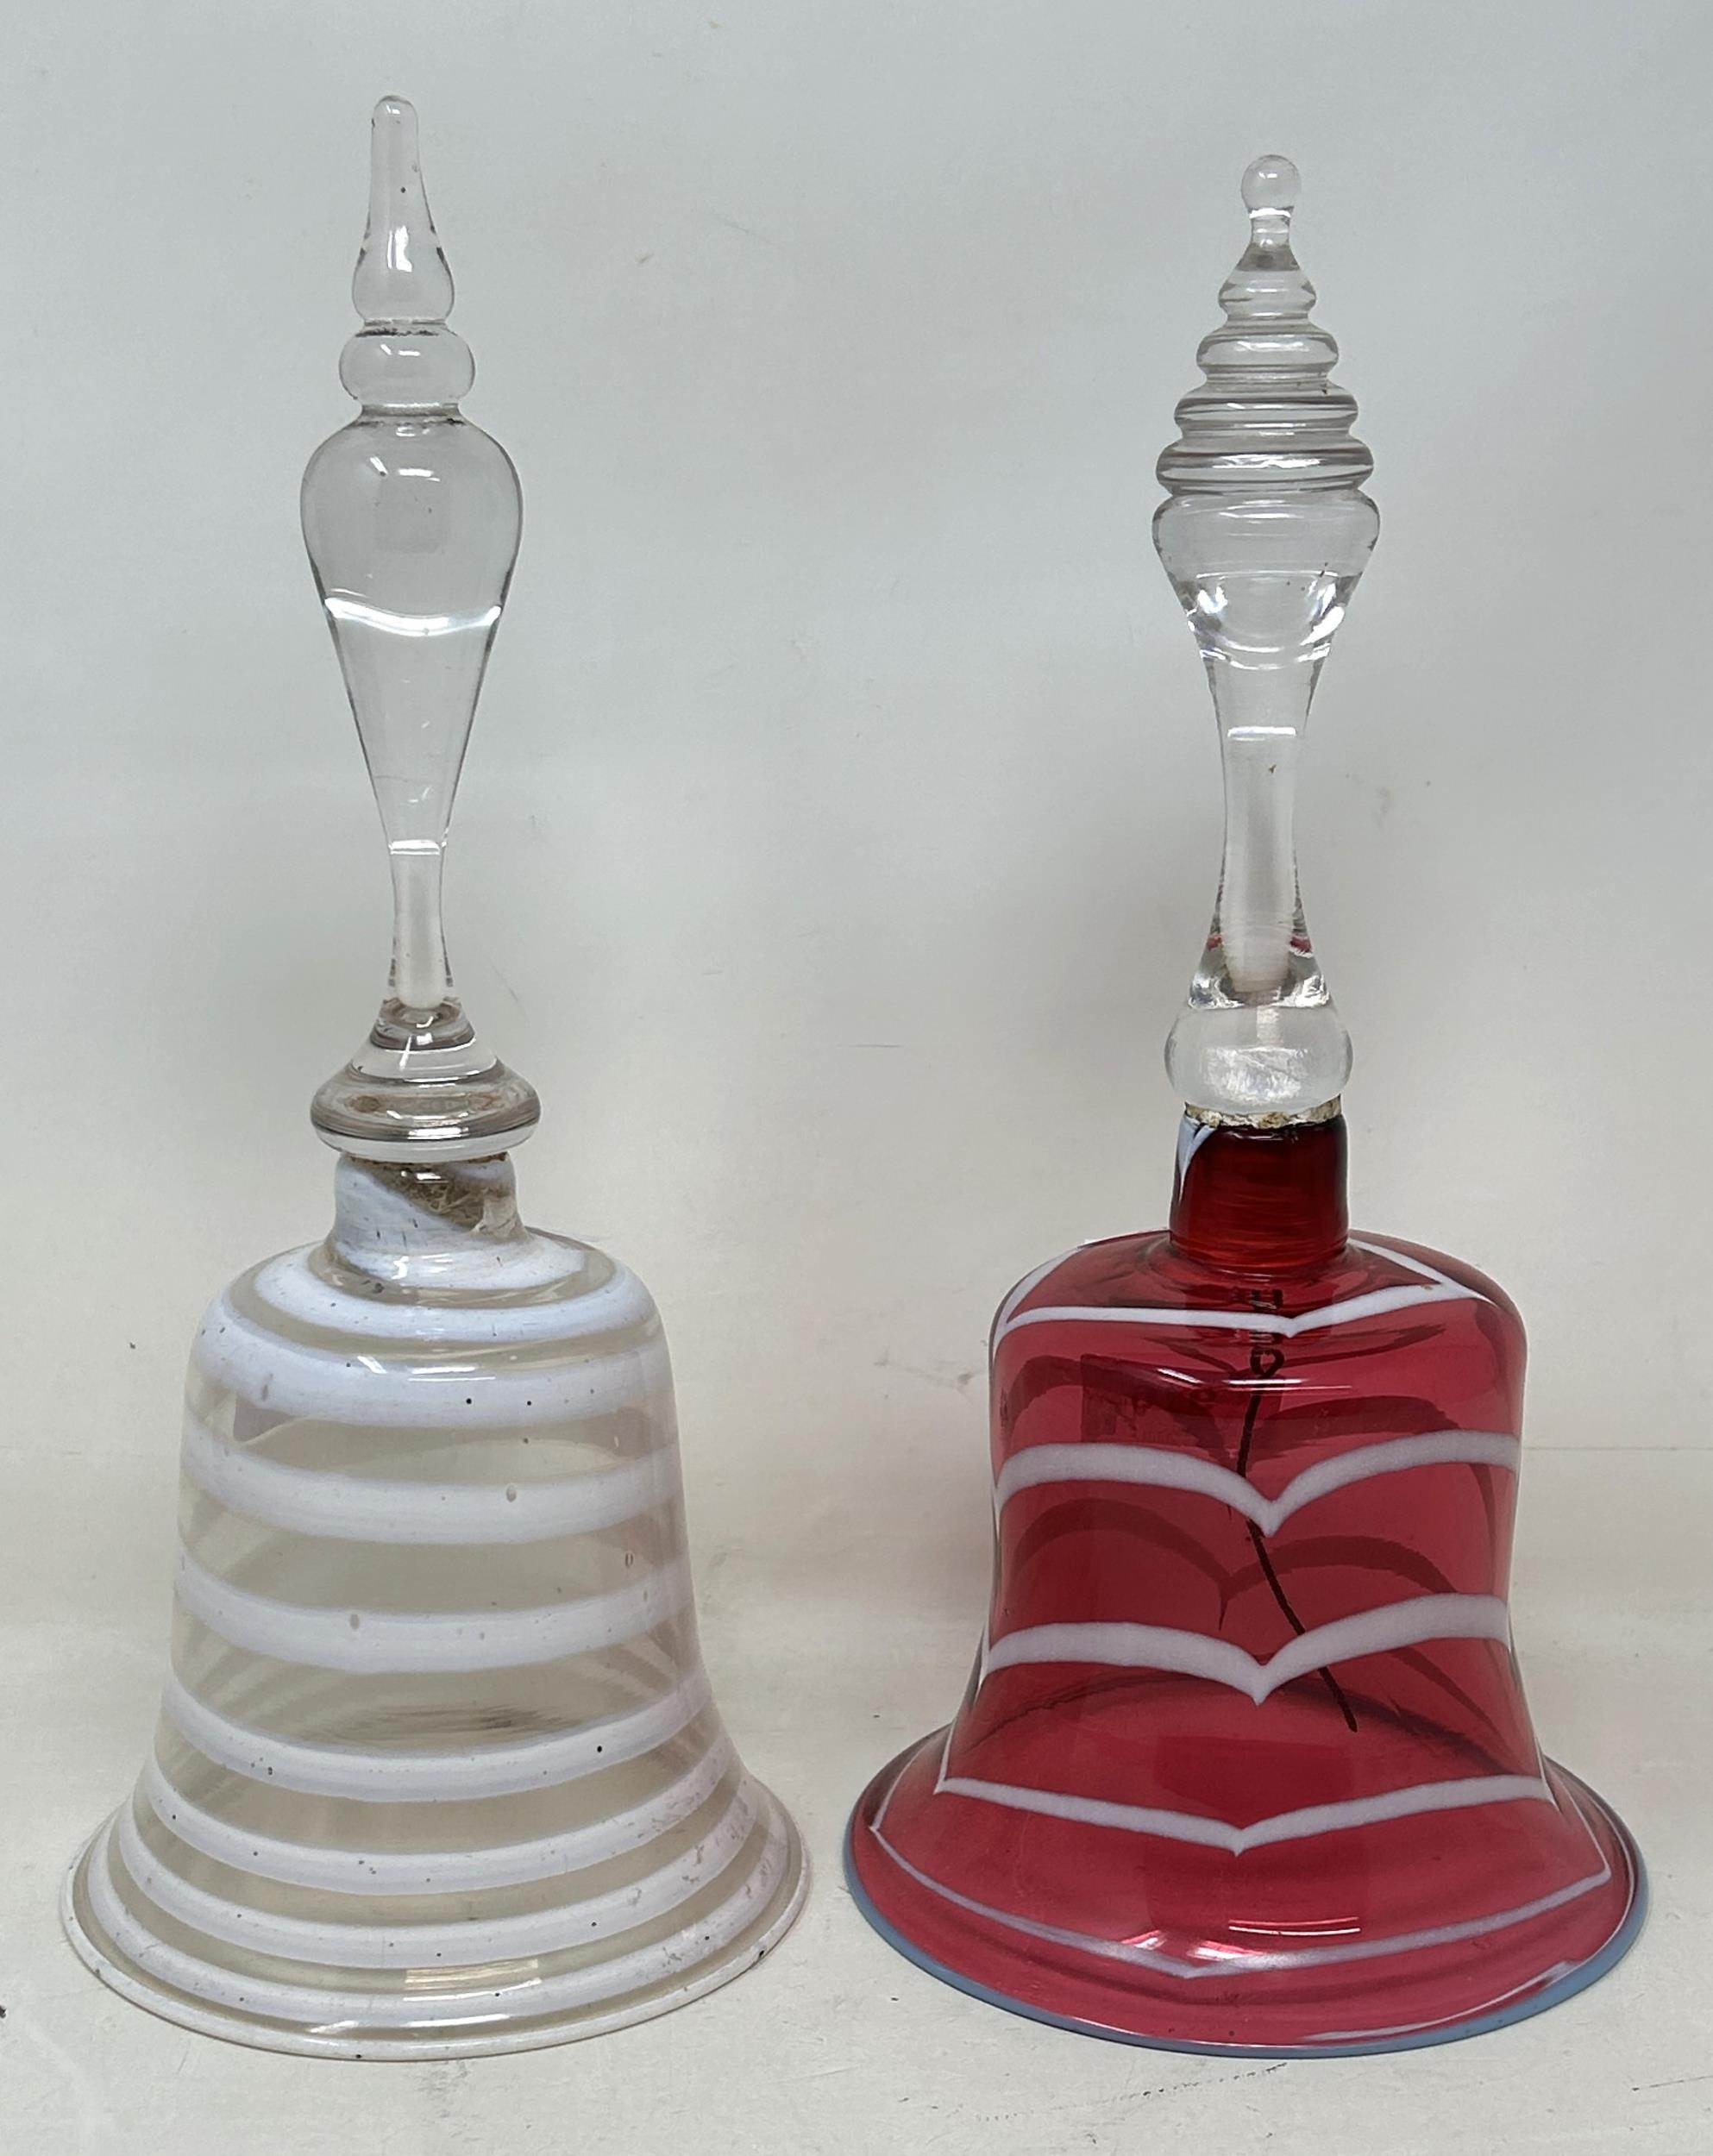 A cranberry, opaque and clear glass bell, 28 cm, and another glass bell, lacking ringers